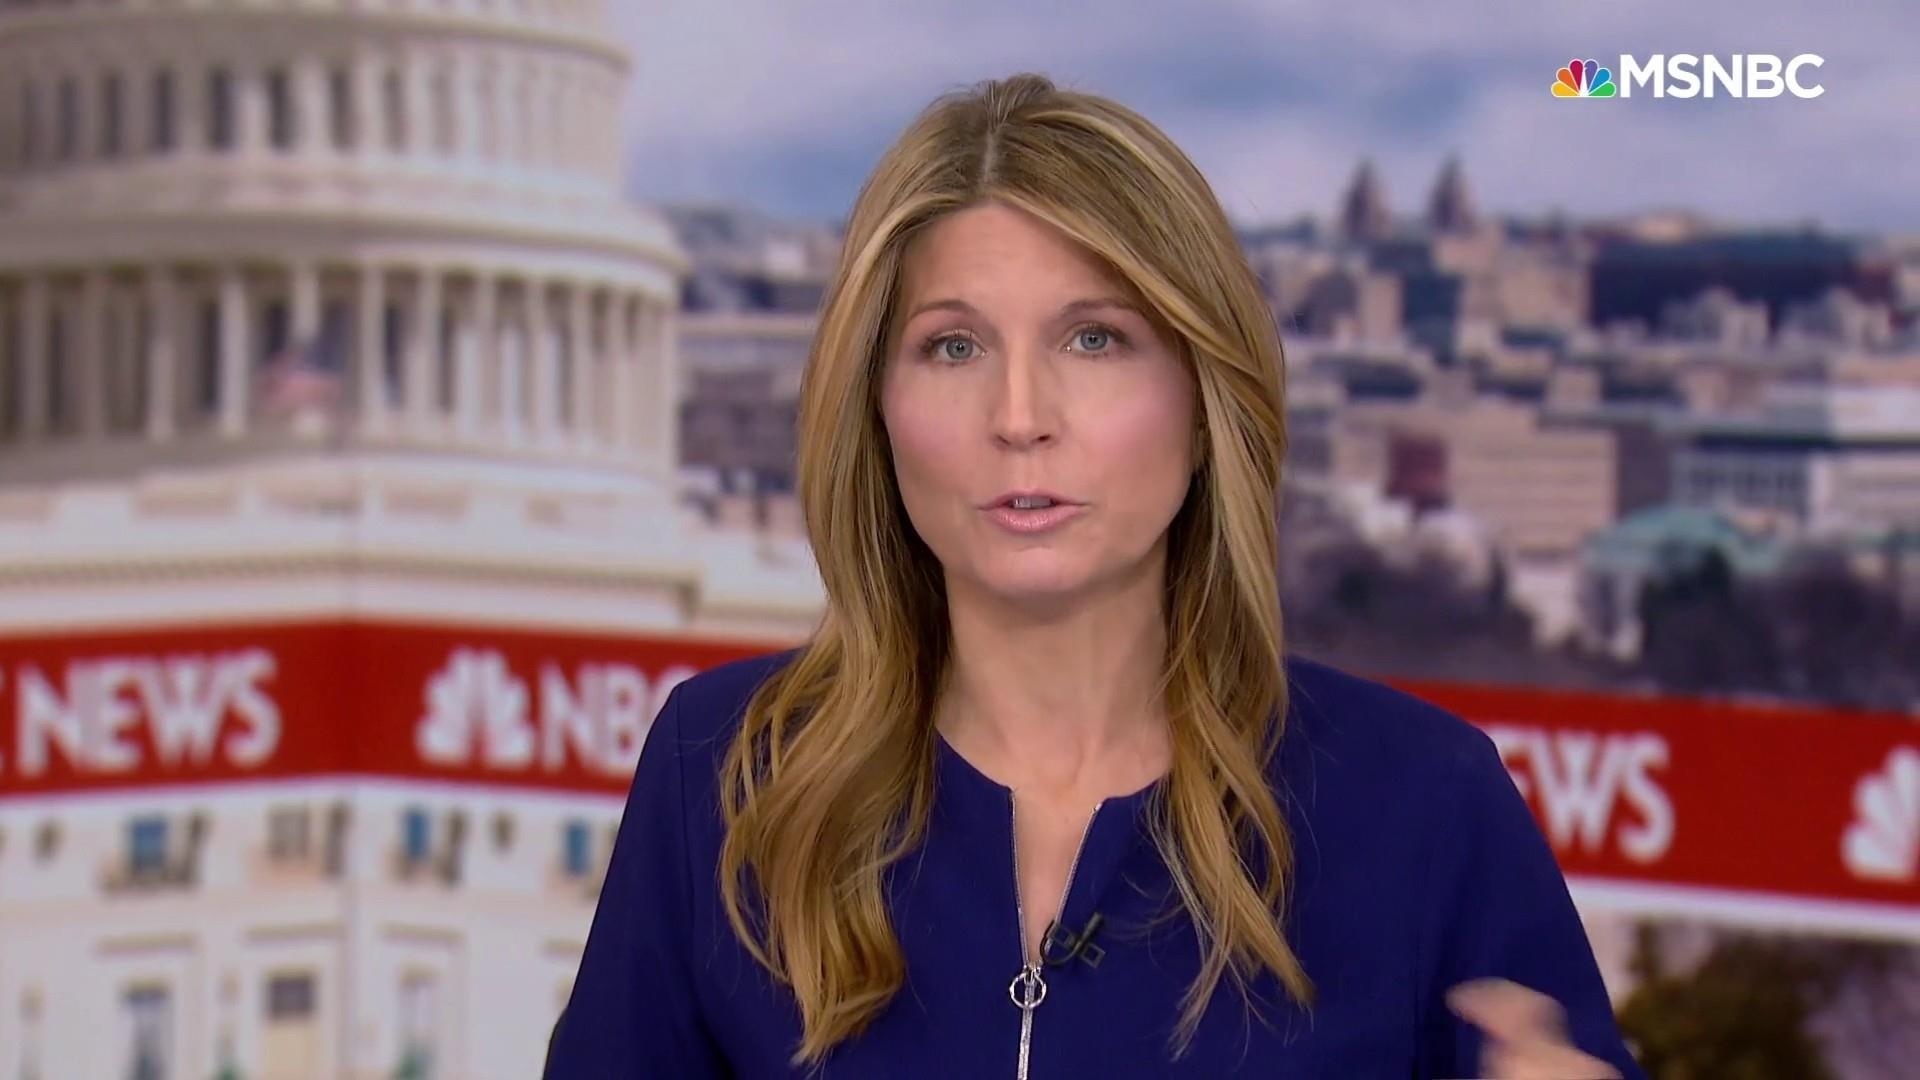 Nicolle Wallace remarks on the "lunacy" of the Senate imp...